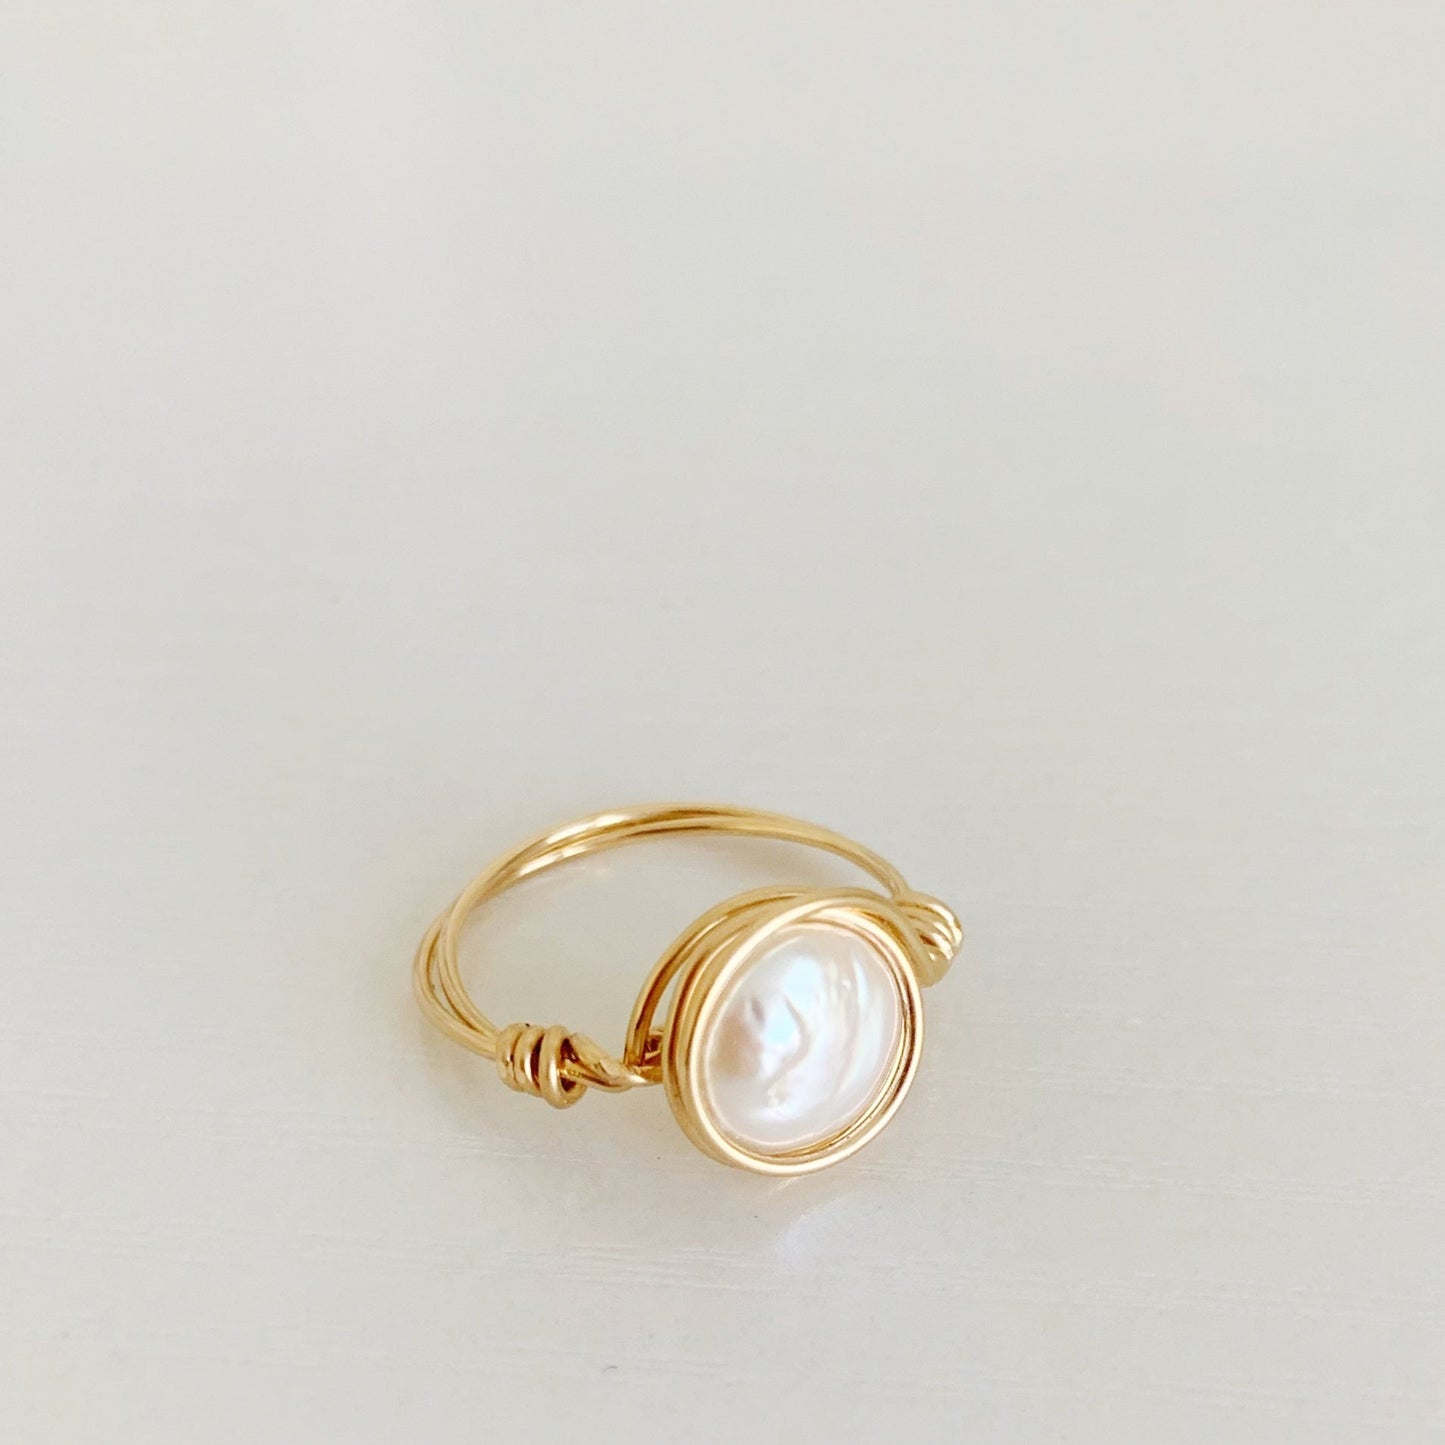 Newport Pearl Ring in 14k gold filled by mermaids and madeleines is a wire wrapped ring that features a freshwater white coin pearl wire wrapped in 14k gold filled wire creating an artful and simple ring. this one is photographed at an angle on a white surface